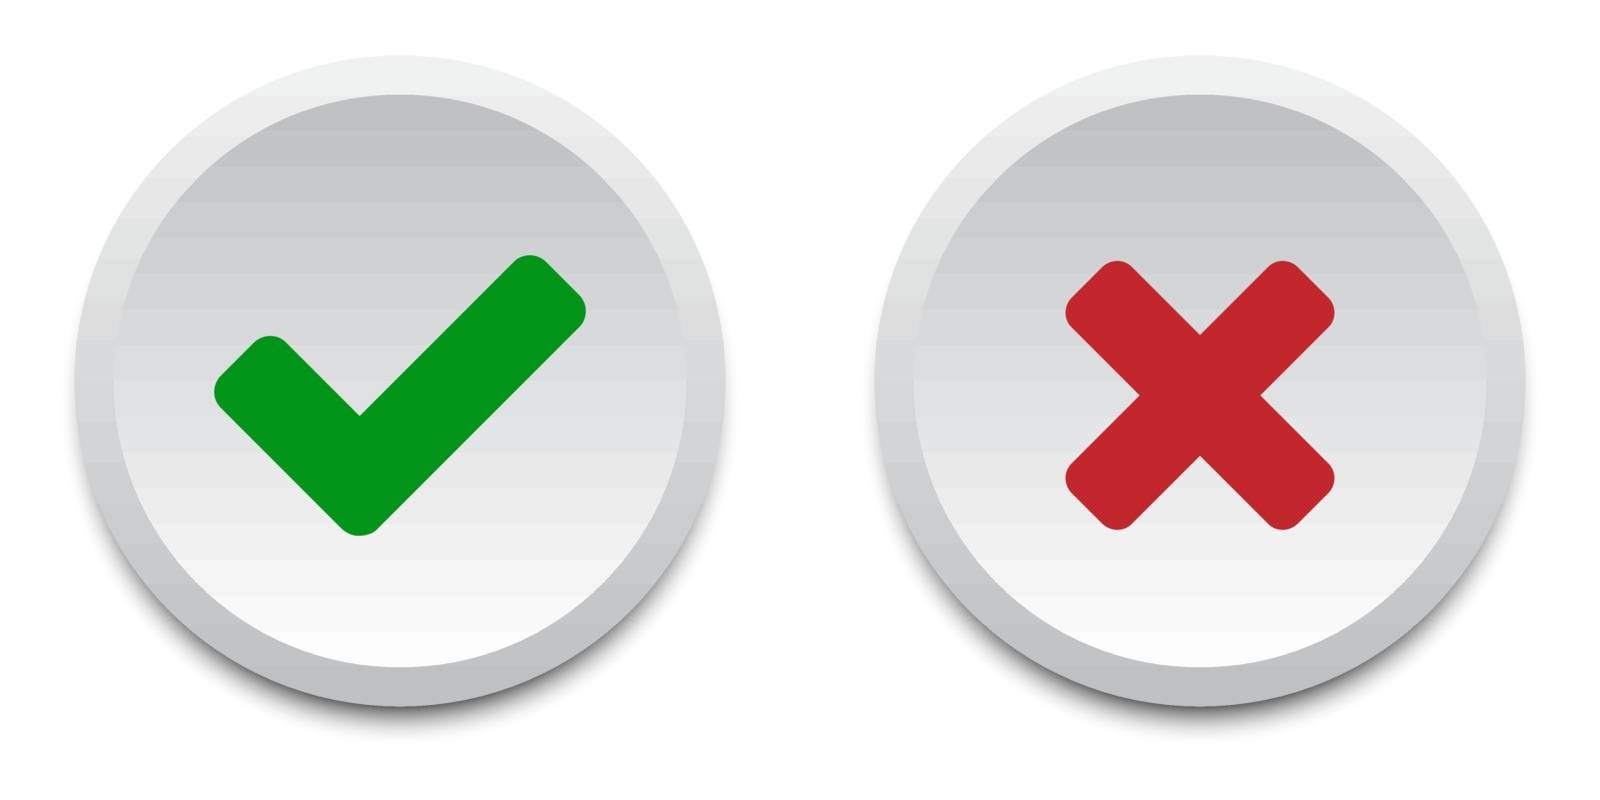 Set of validation buttons